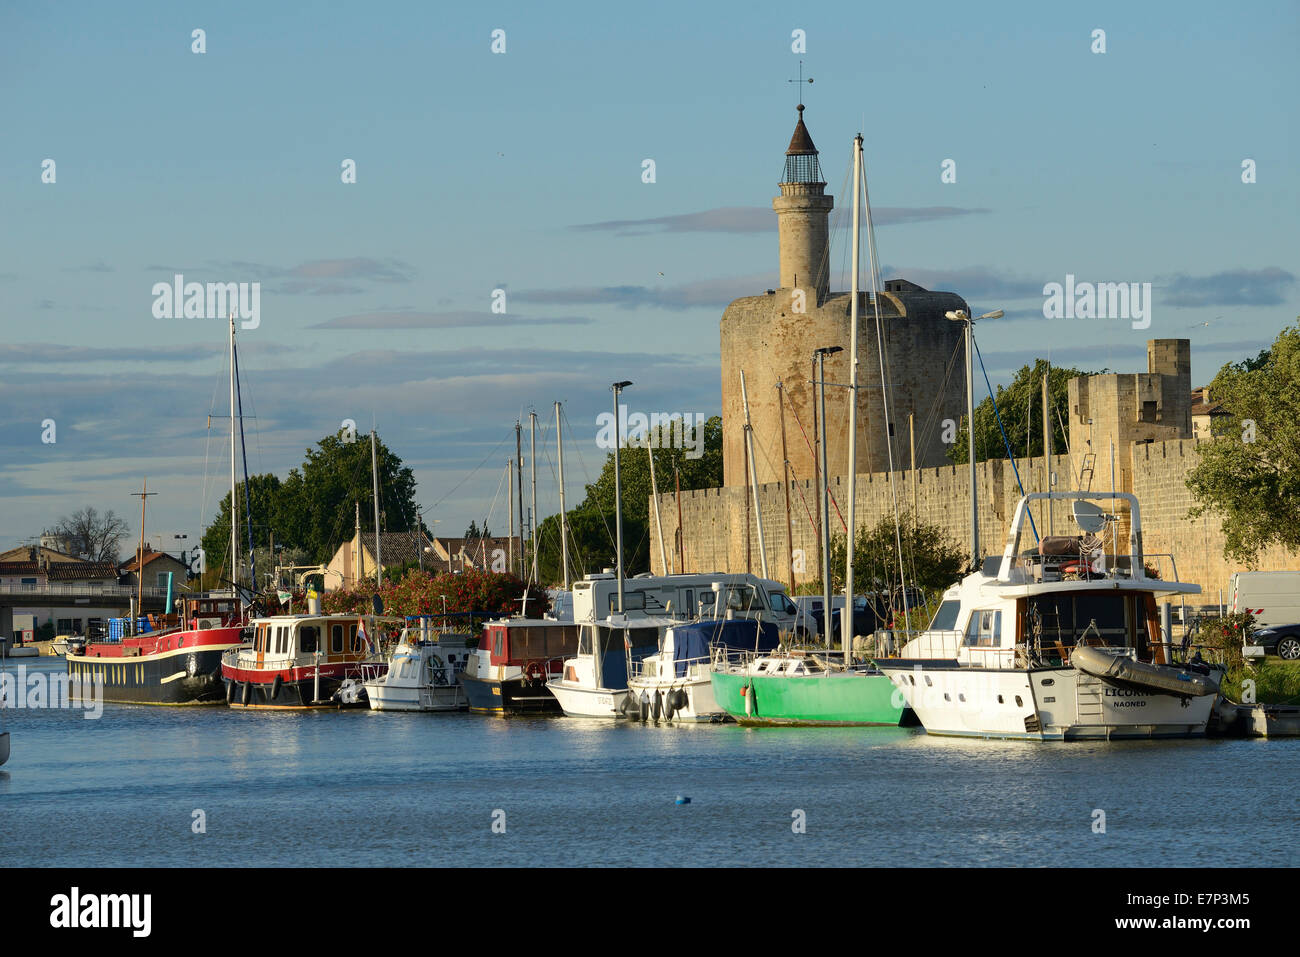 Europa, Frankreich, Languedoc - Roussillon, Camargue, Aigues-Mortes, doppelwandig, Stadt, mittelalterliche, Dock, Turm, Boote, Wand Stockfoto